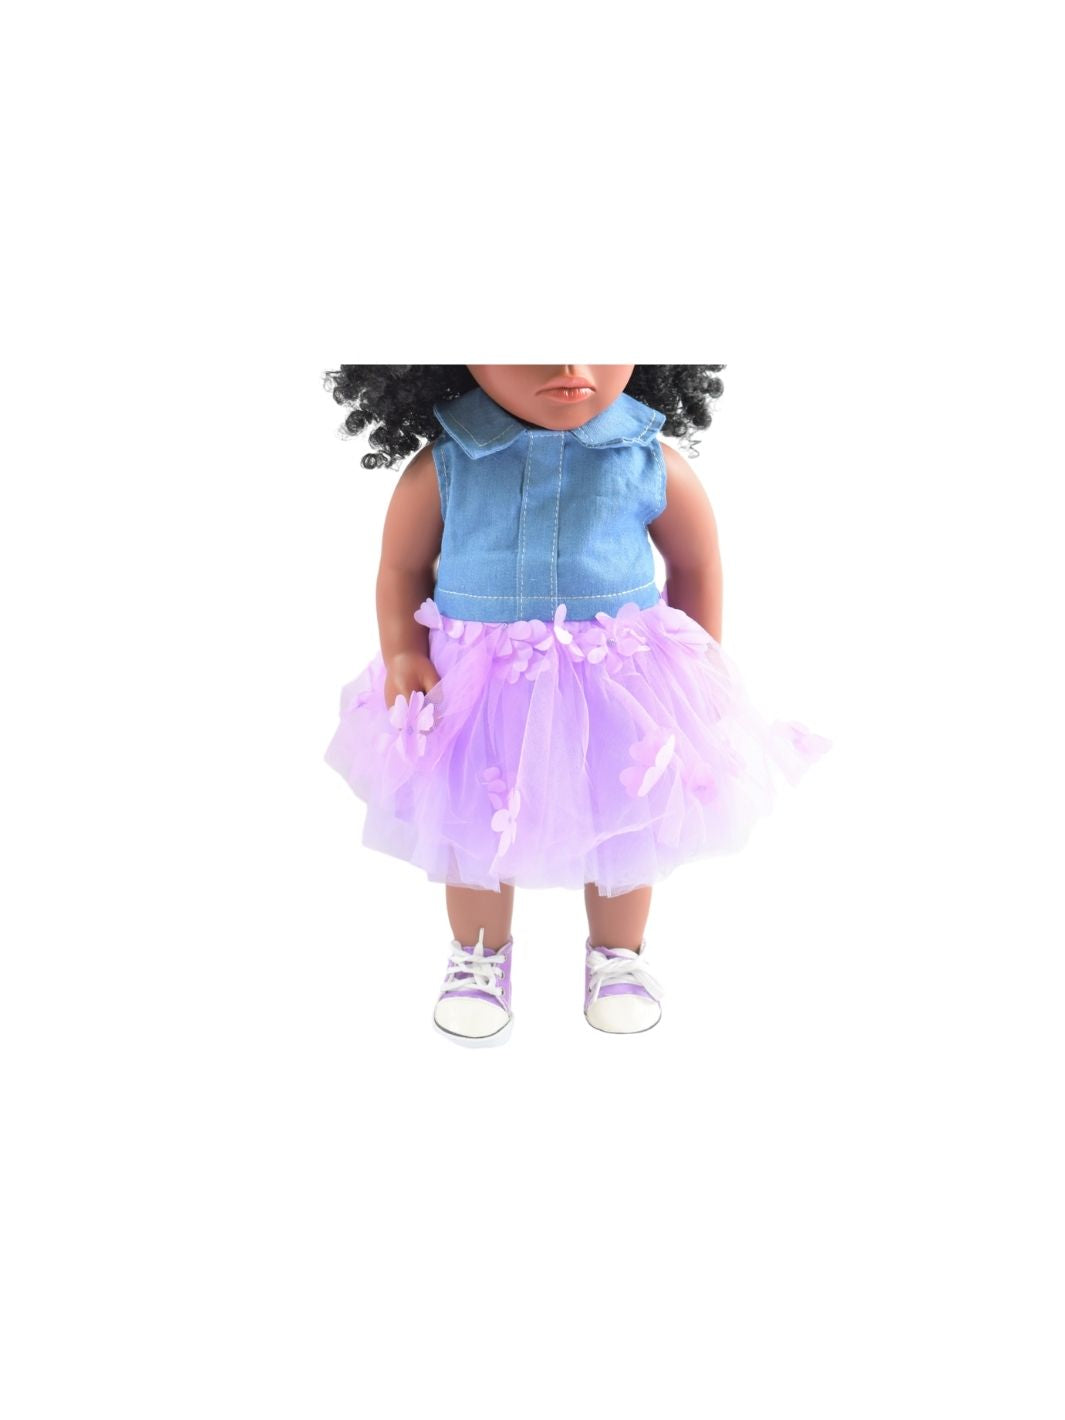 Lilac Denim Tutu Dress & Bow - For 18" dolls: Outfit Only-Accessories-Beautiful Curly Me